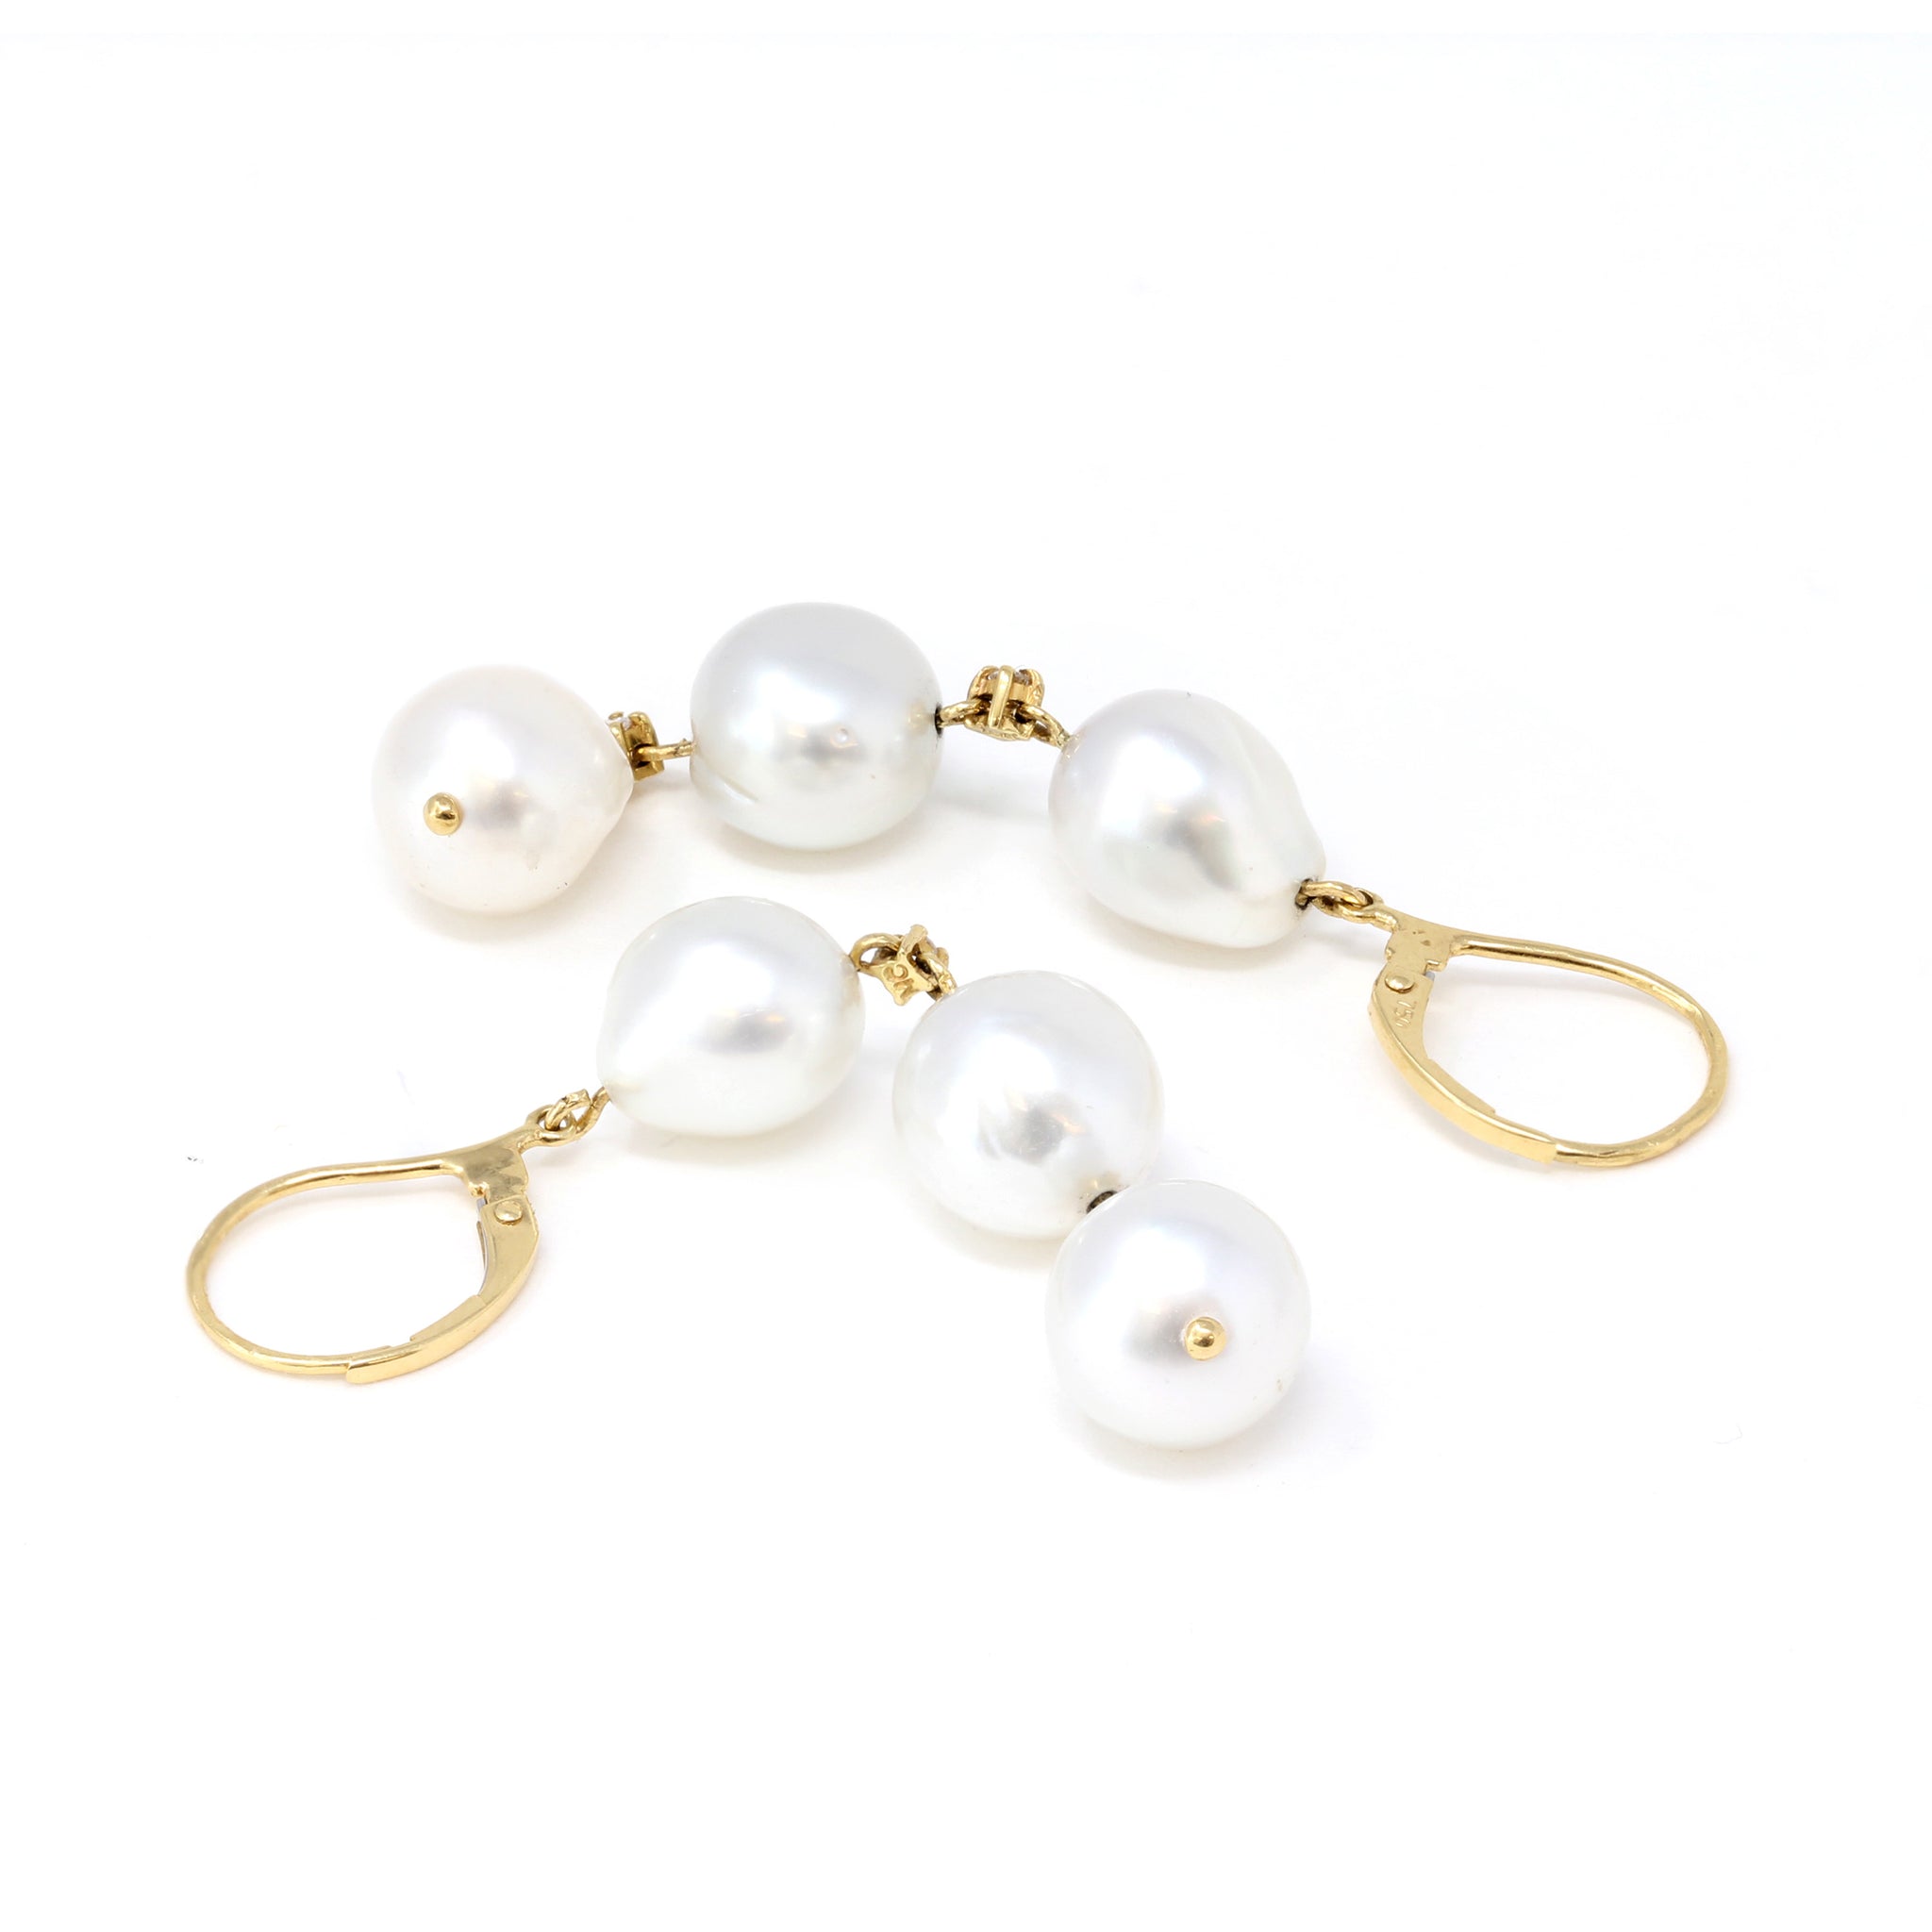 Pair of South Sea Baroque Pearls 18k Gold Dangling Earrings with Diamo ...